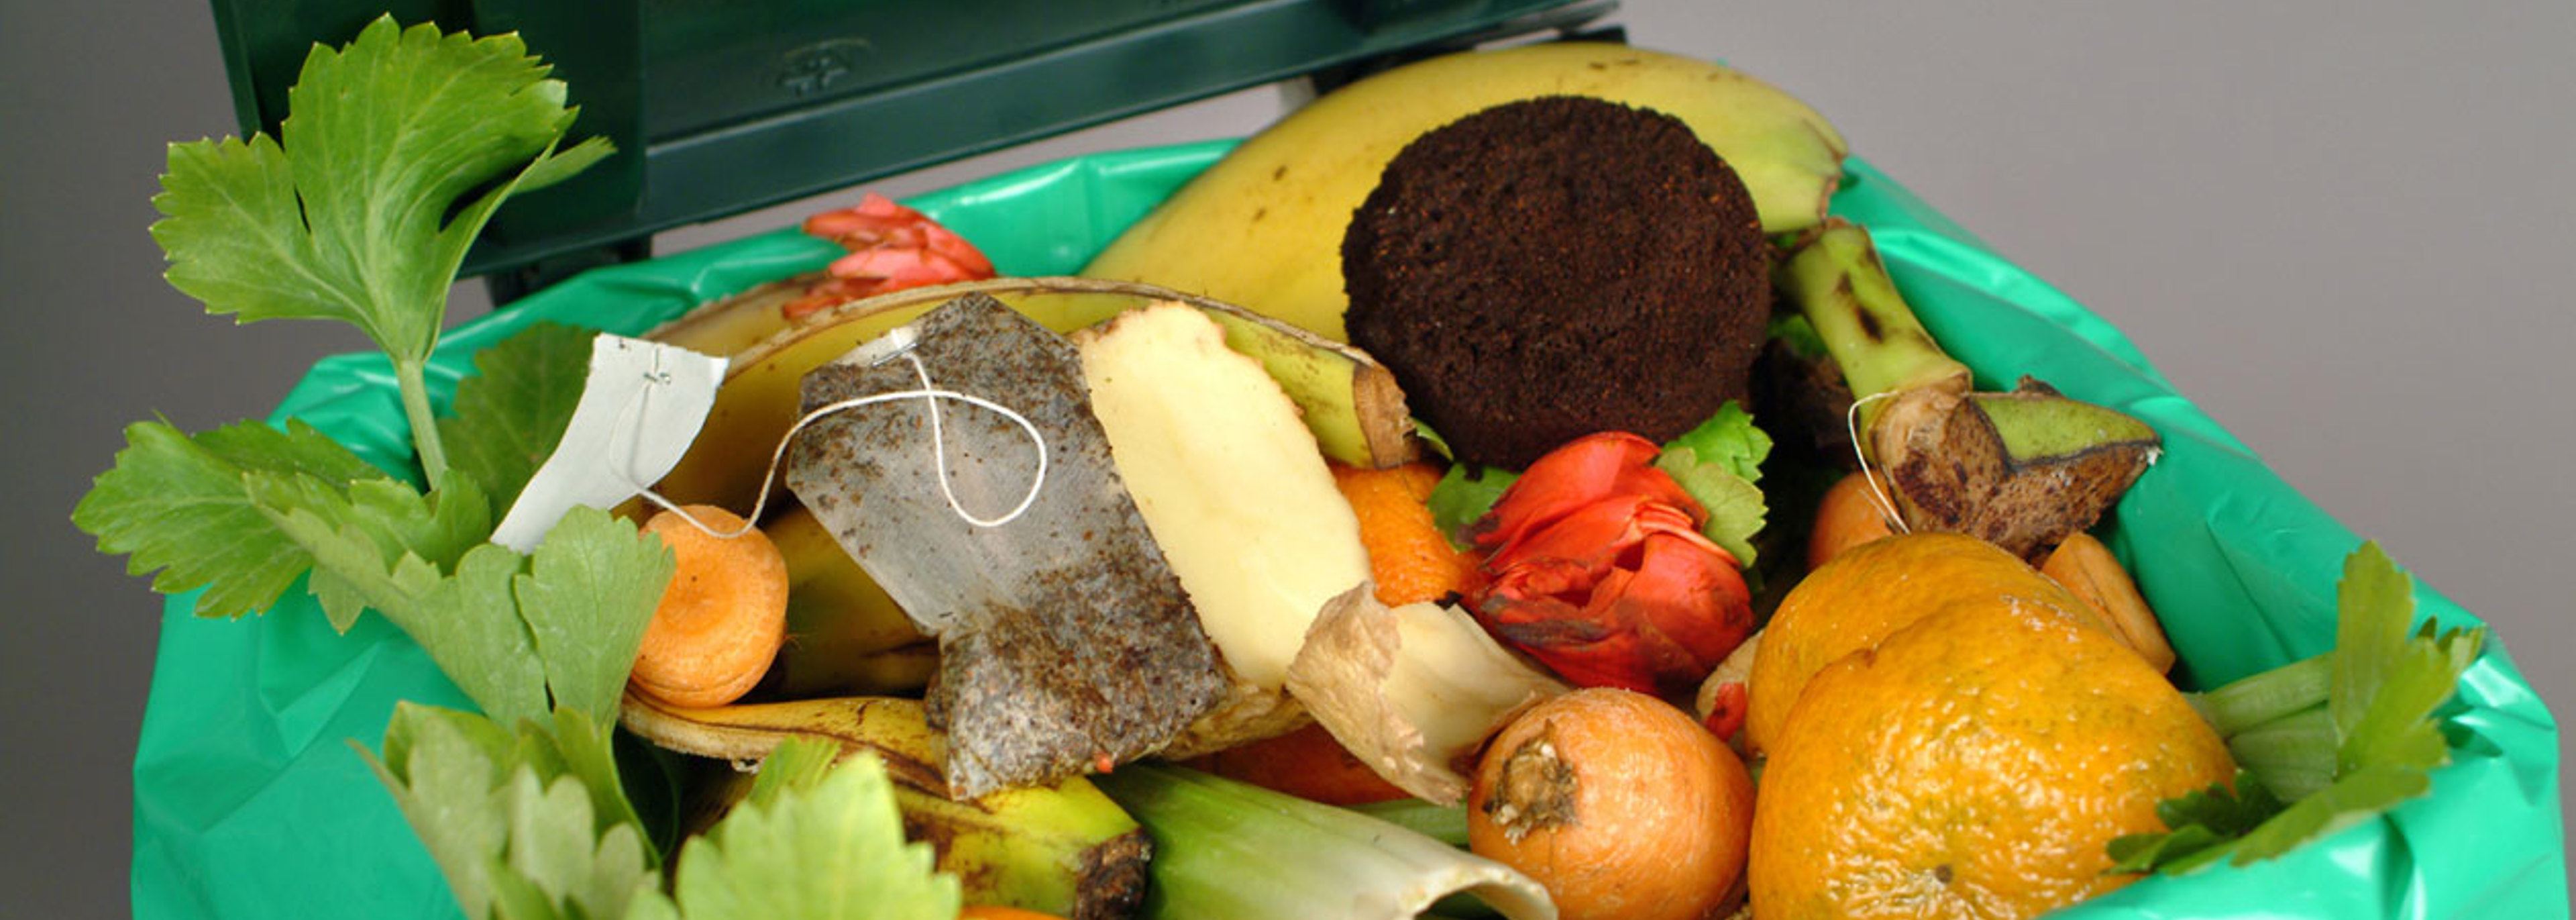 Waste strategy could lead to monthly bin collections